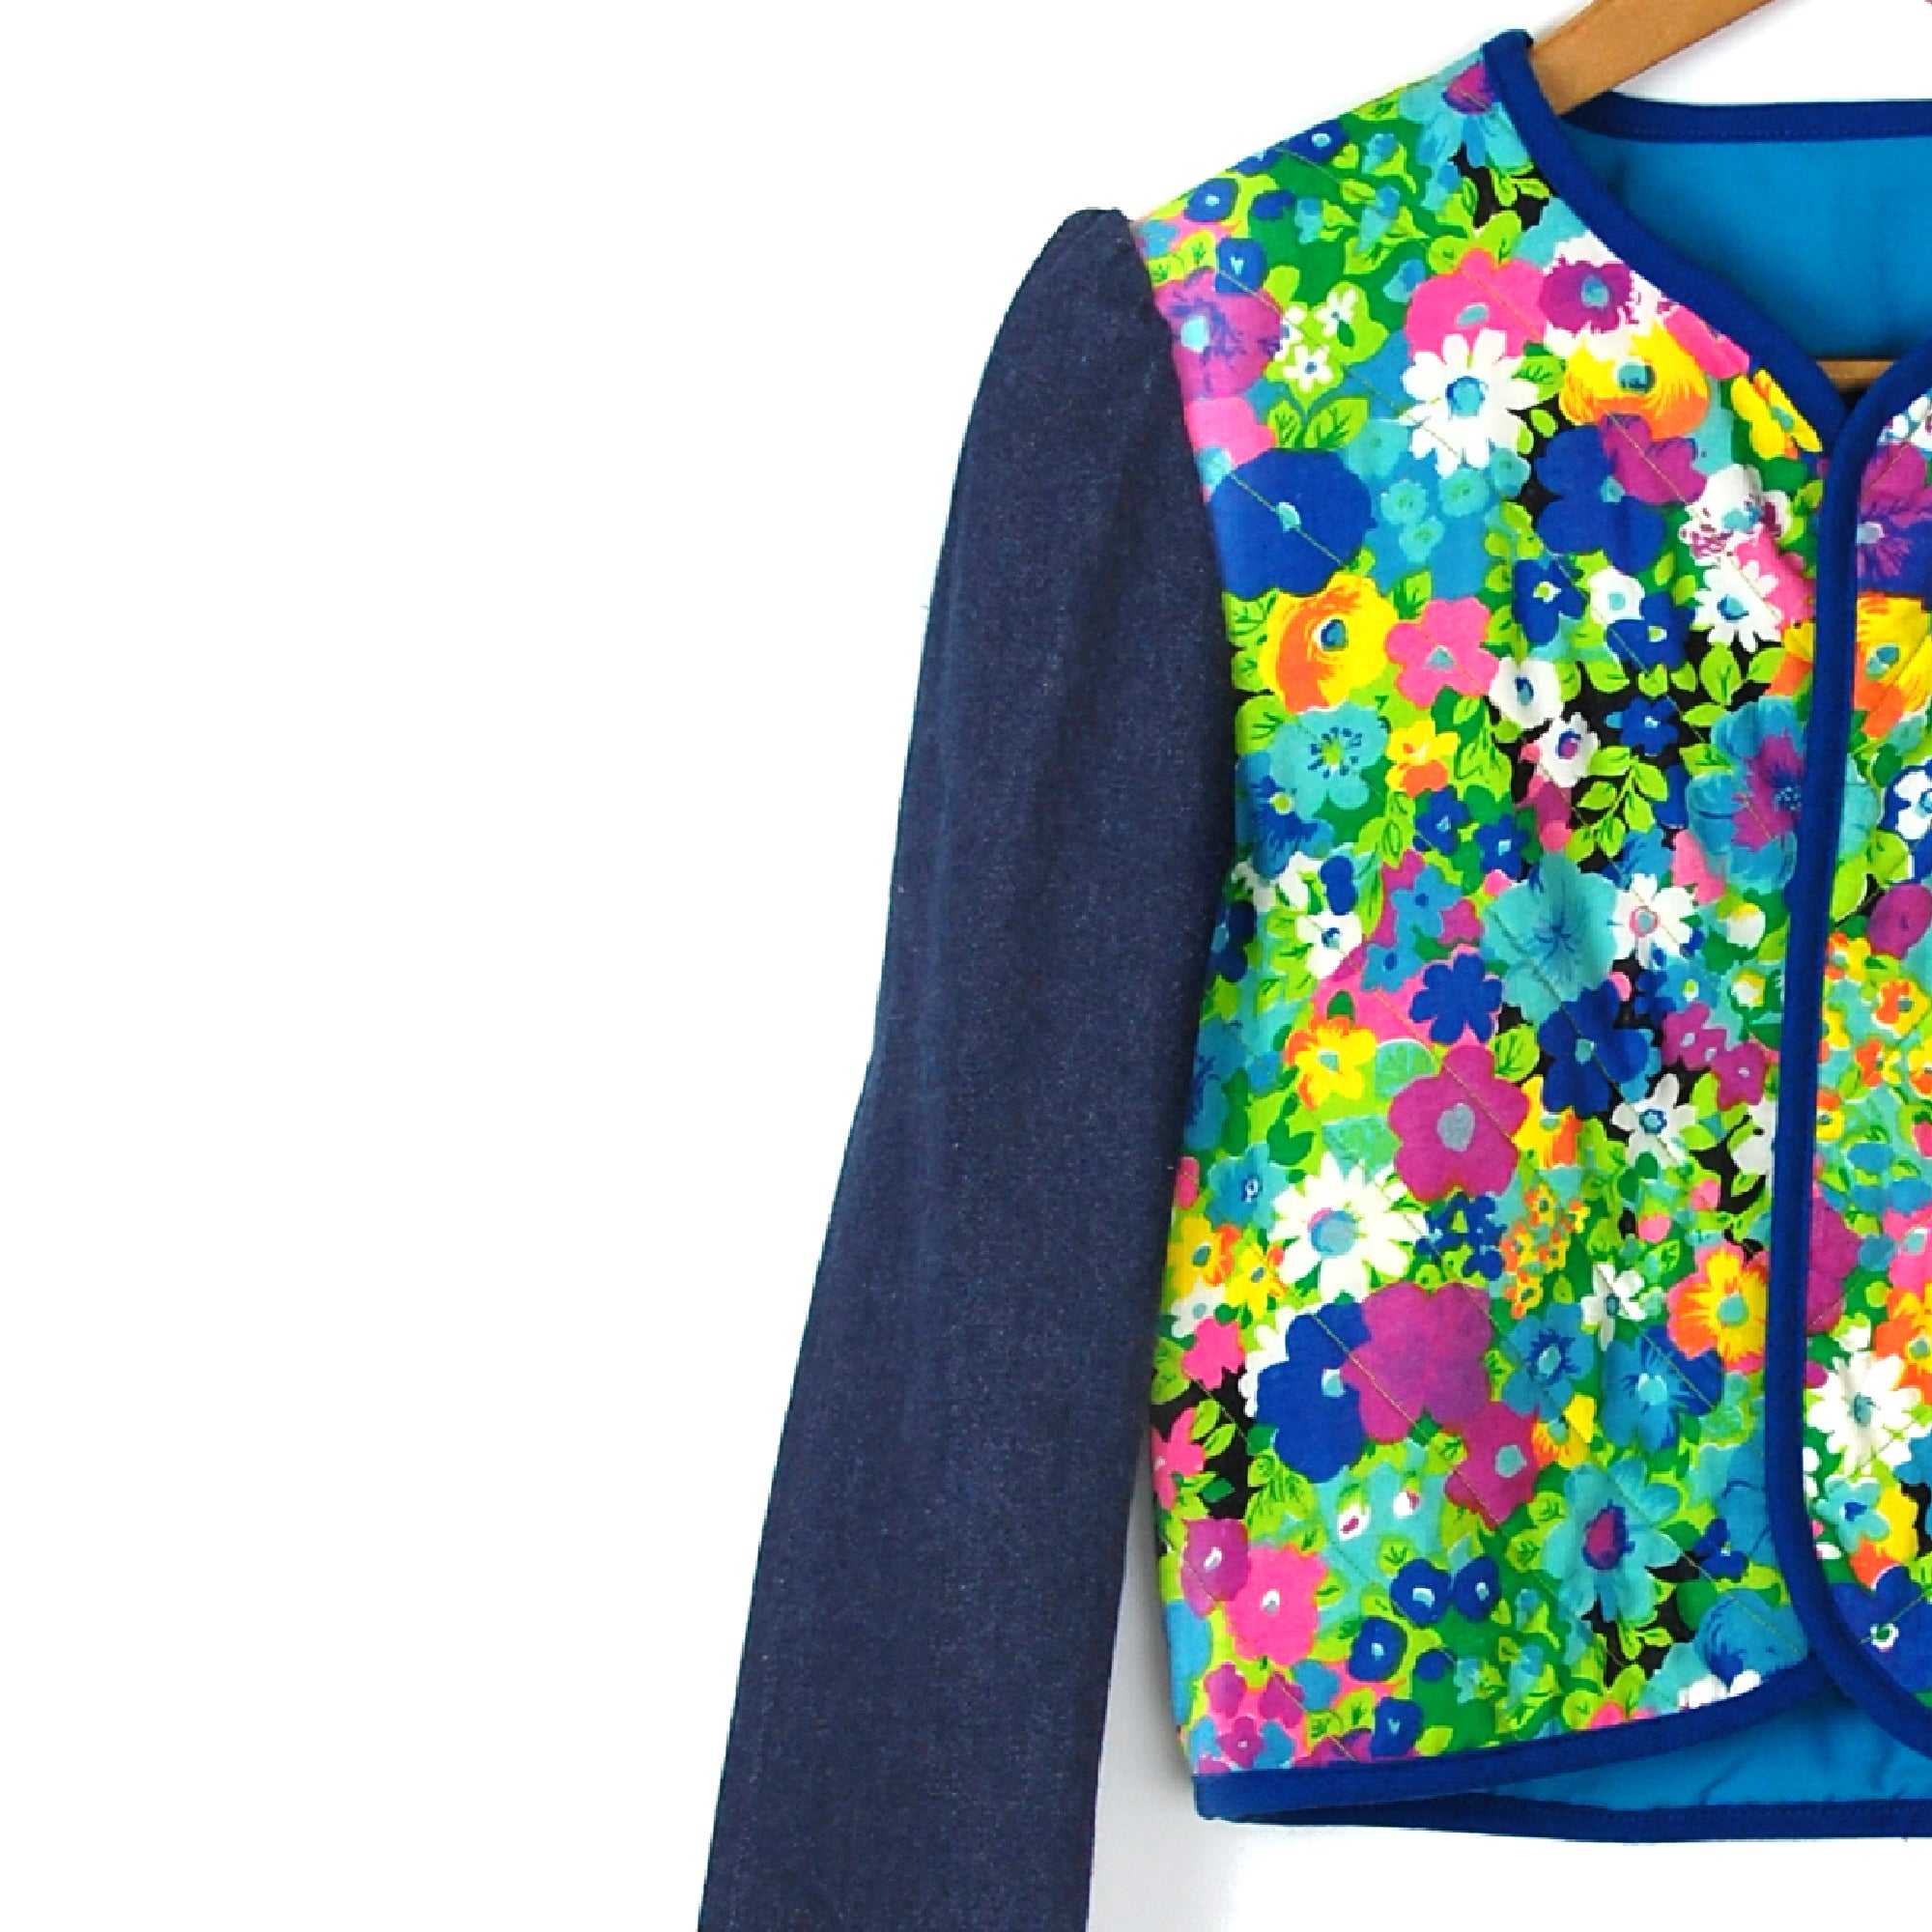 SPRING FEVER QUILTED JACKET - Late to the Party